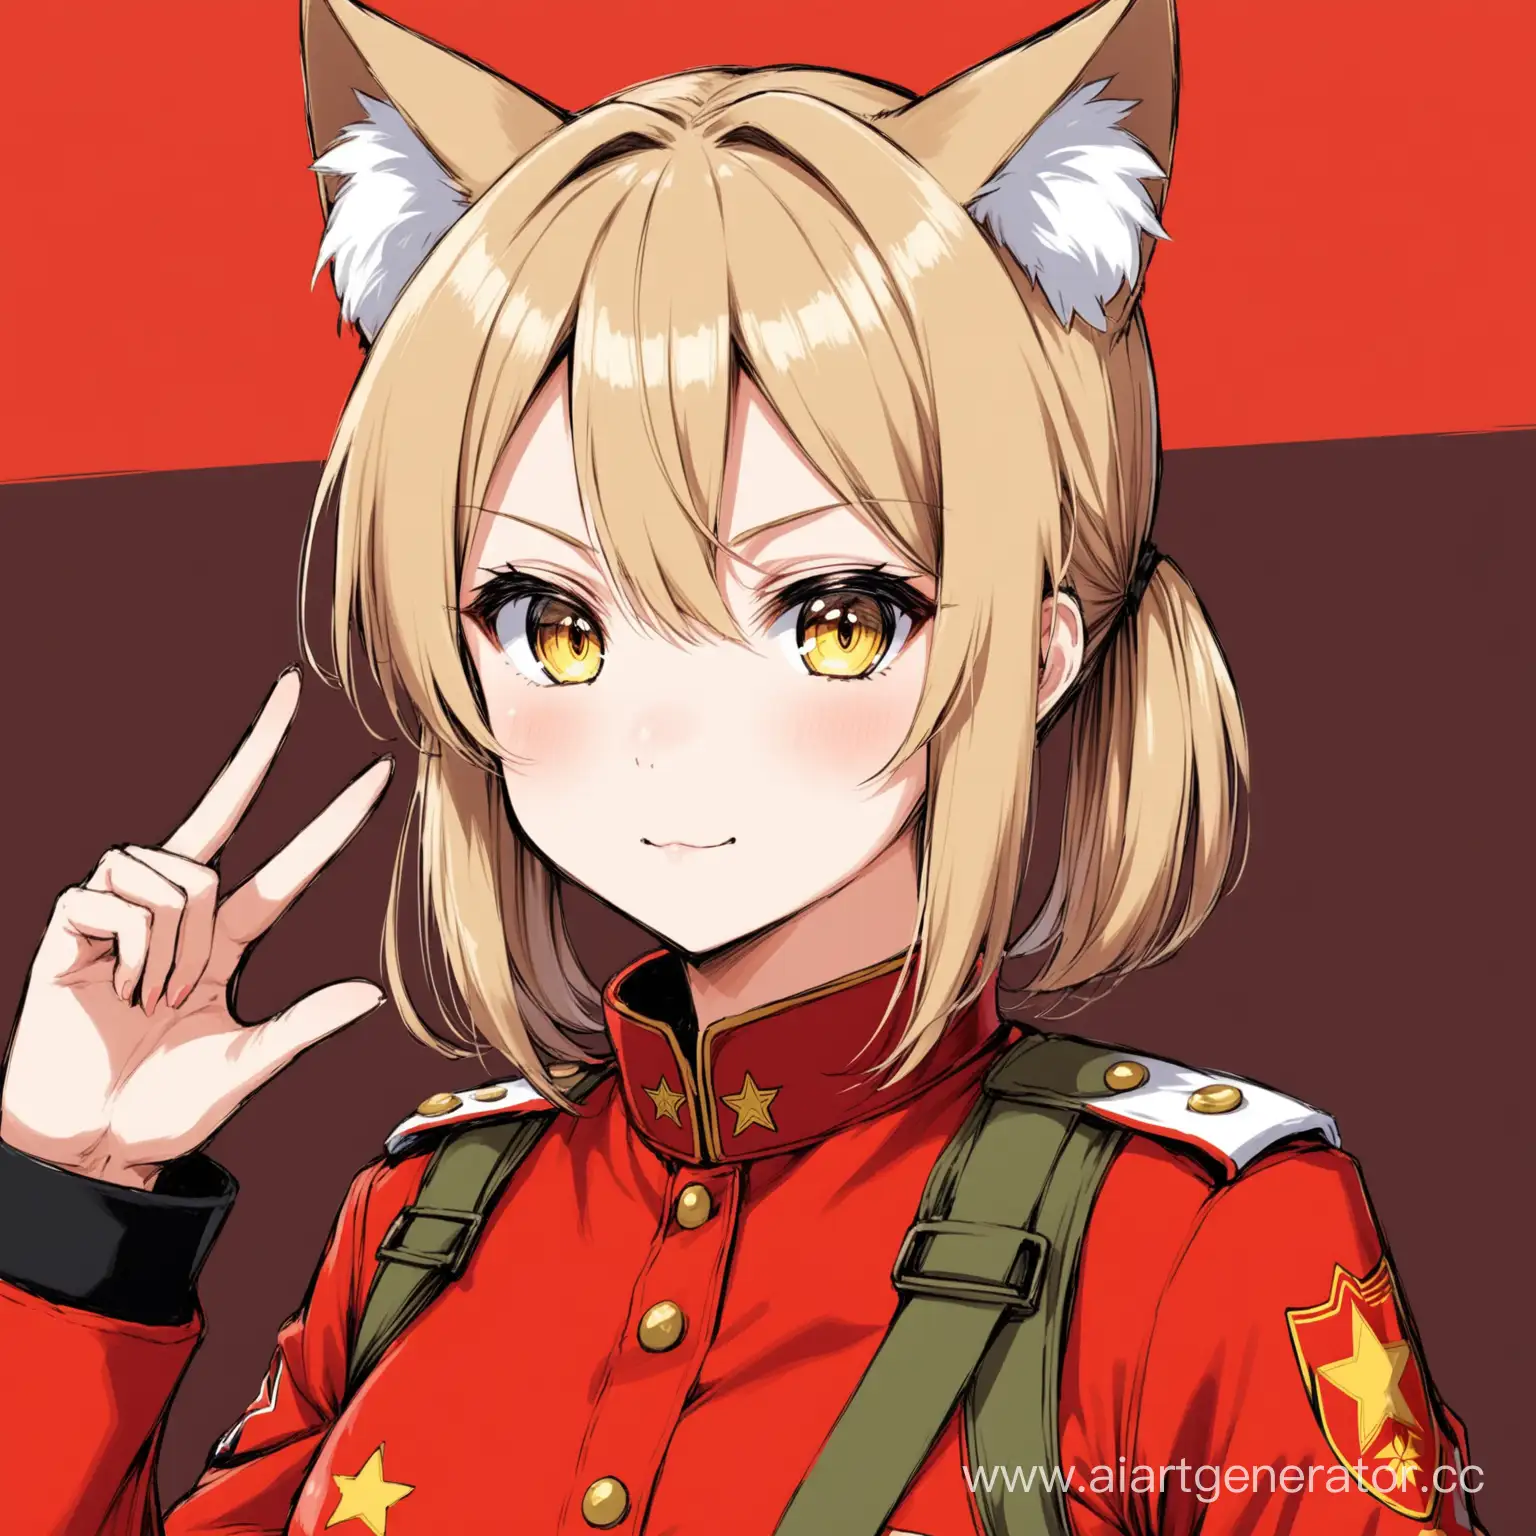 Anime-Girl-in-Red-MilitaryStyle-Outfit-with-Cat-Ears